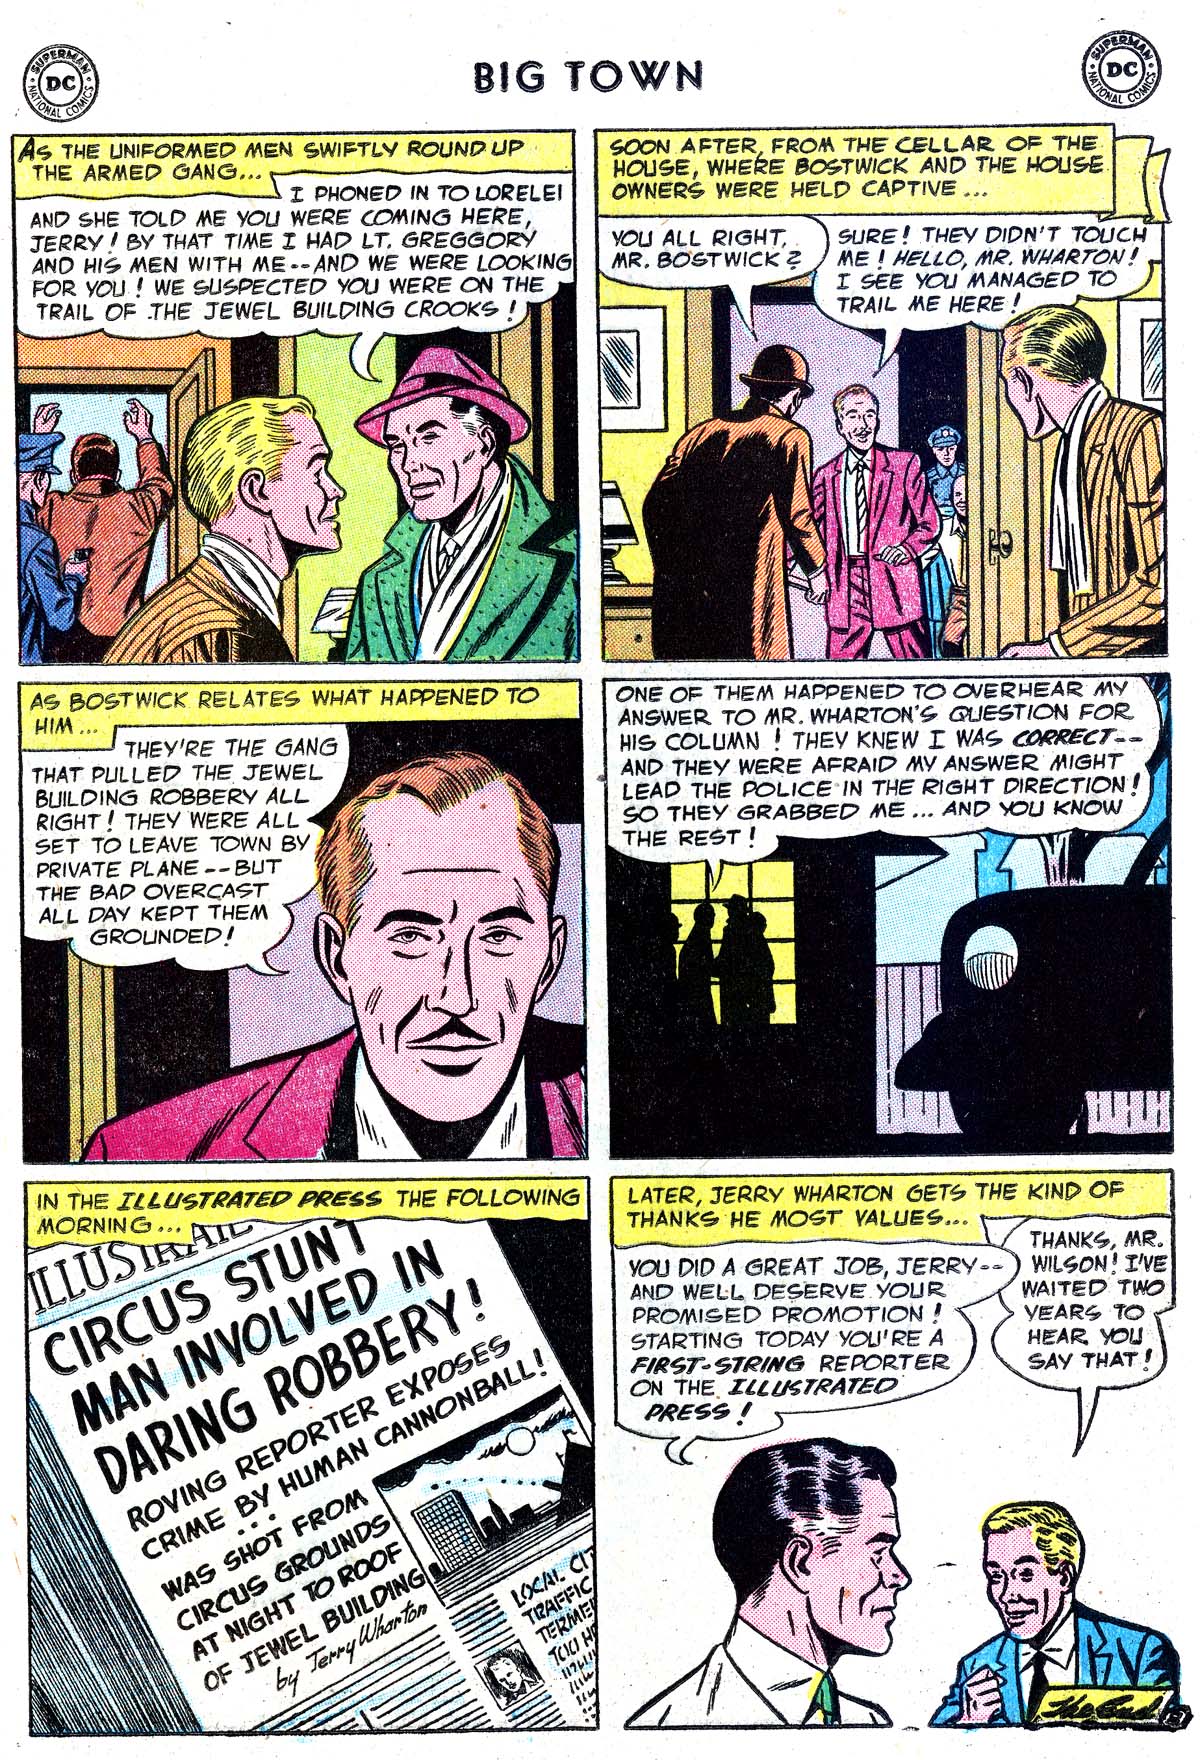 Big Town (1951) 38 Page 20